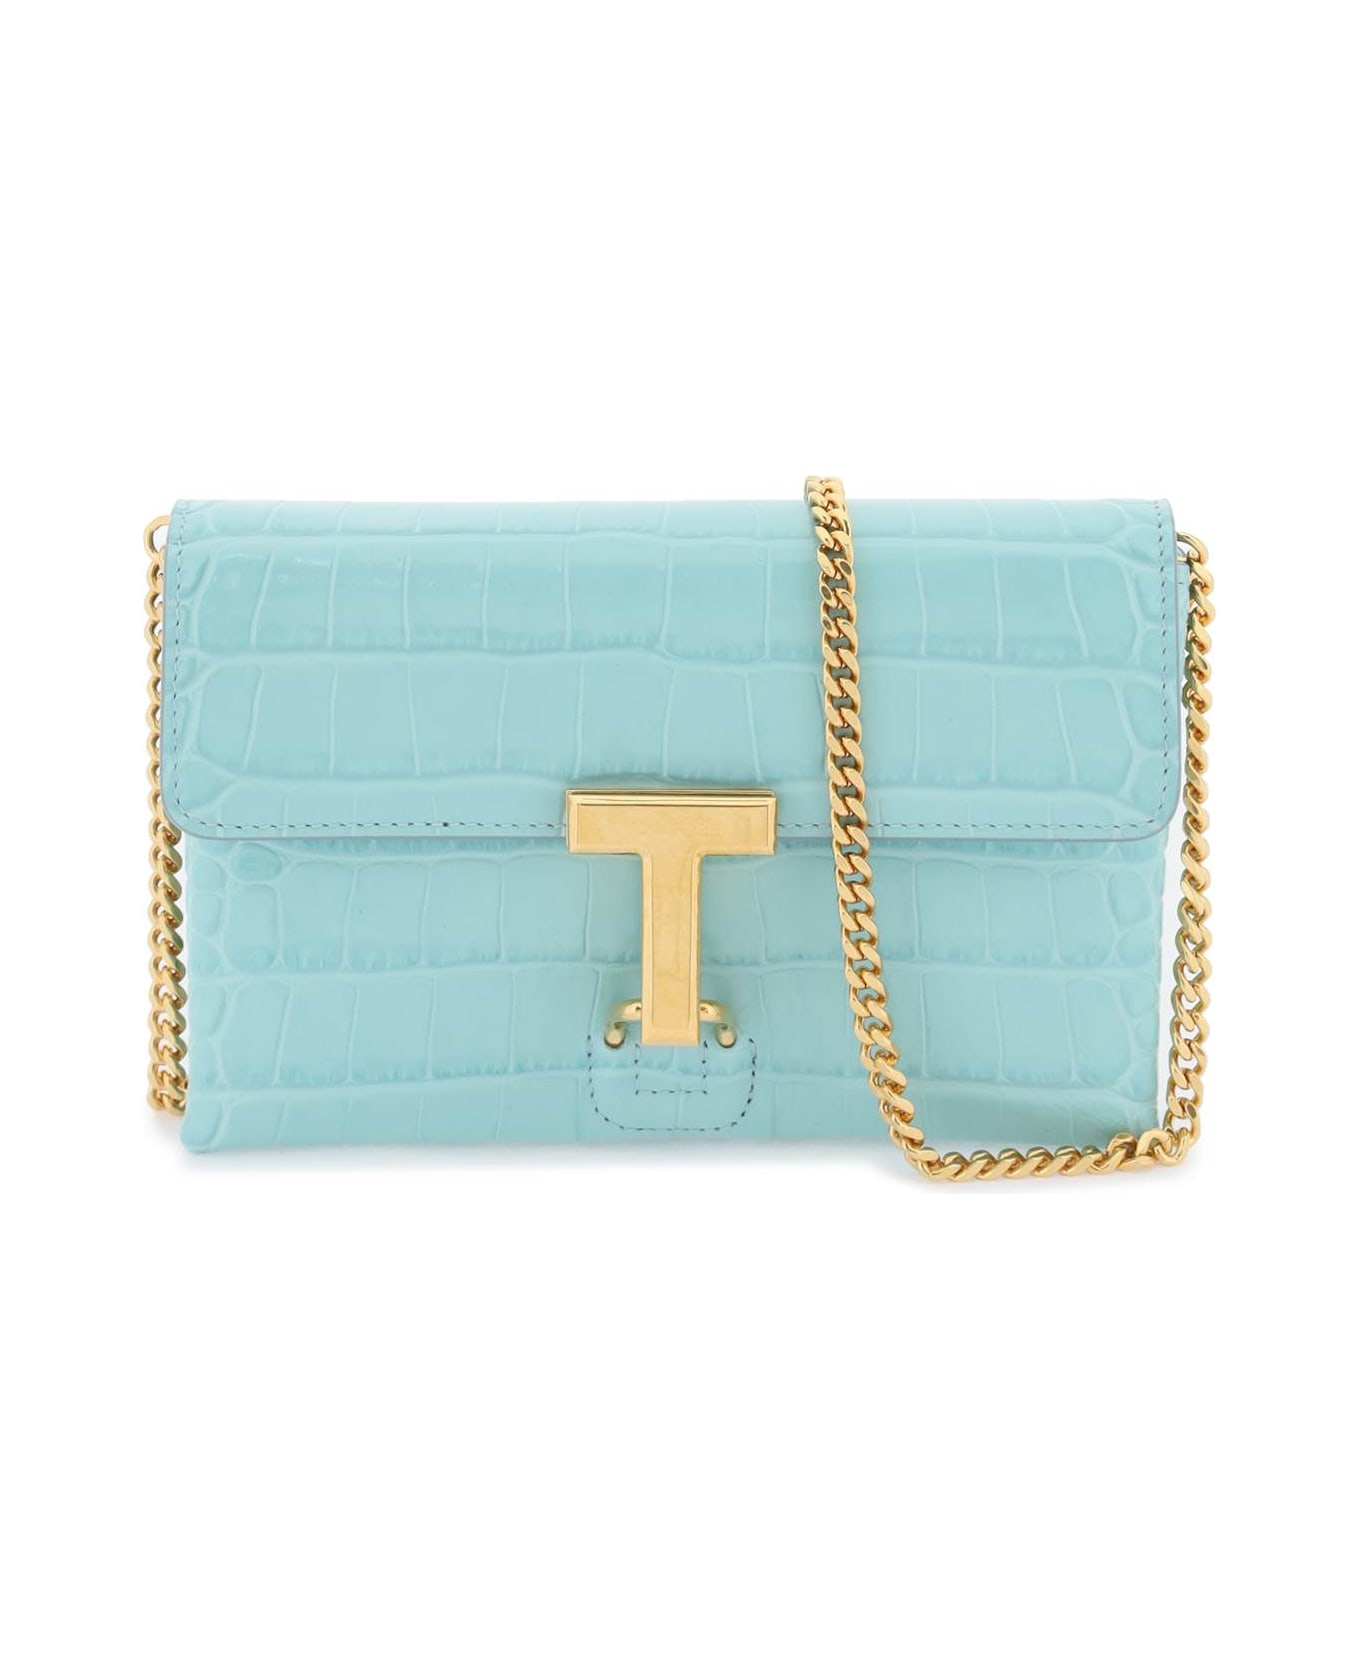 Tom Ford Croco-embossed Leather Mini Bag - PASTEL TURQUOISE (Light blue) ショルダーバッグ